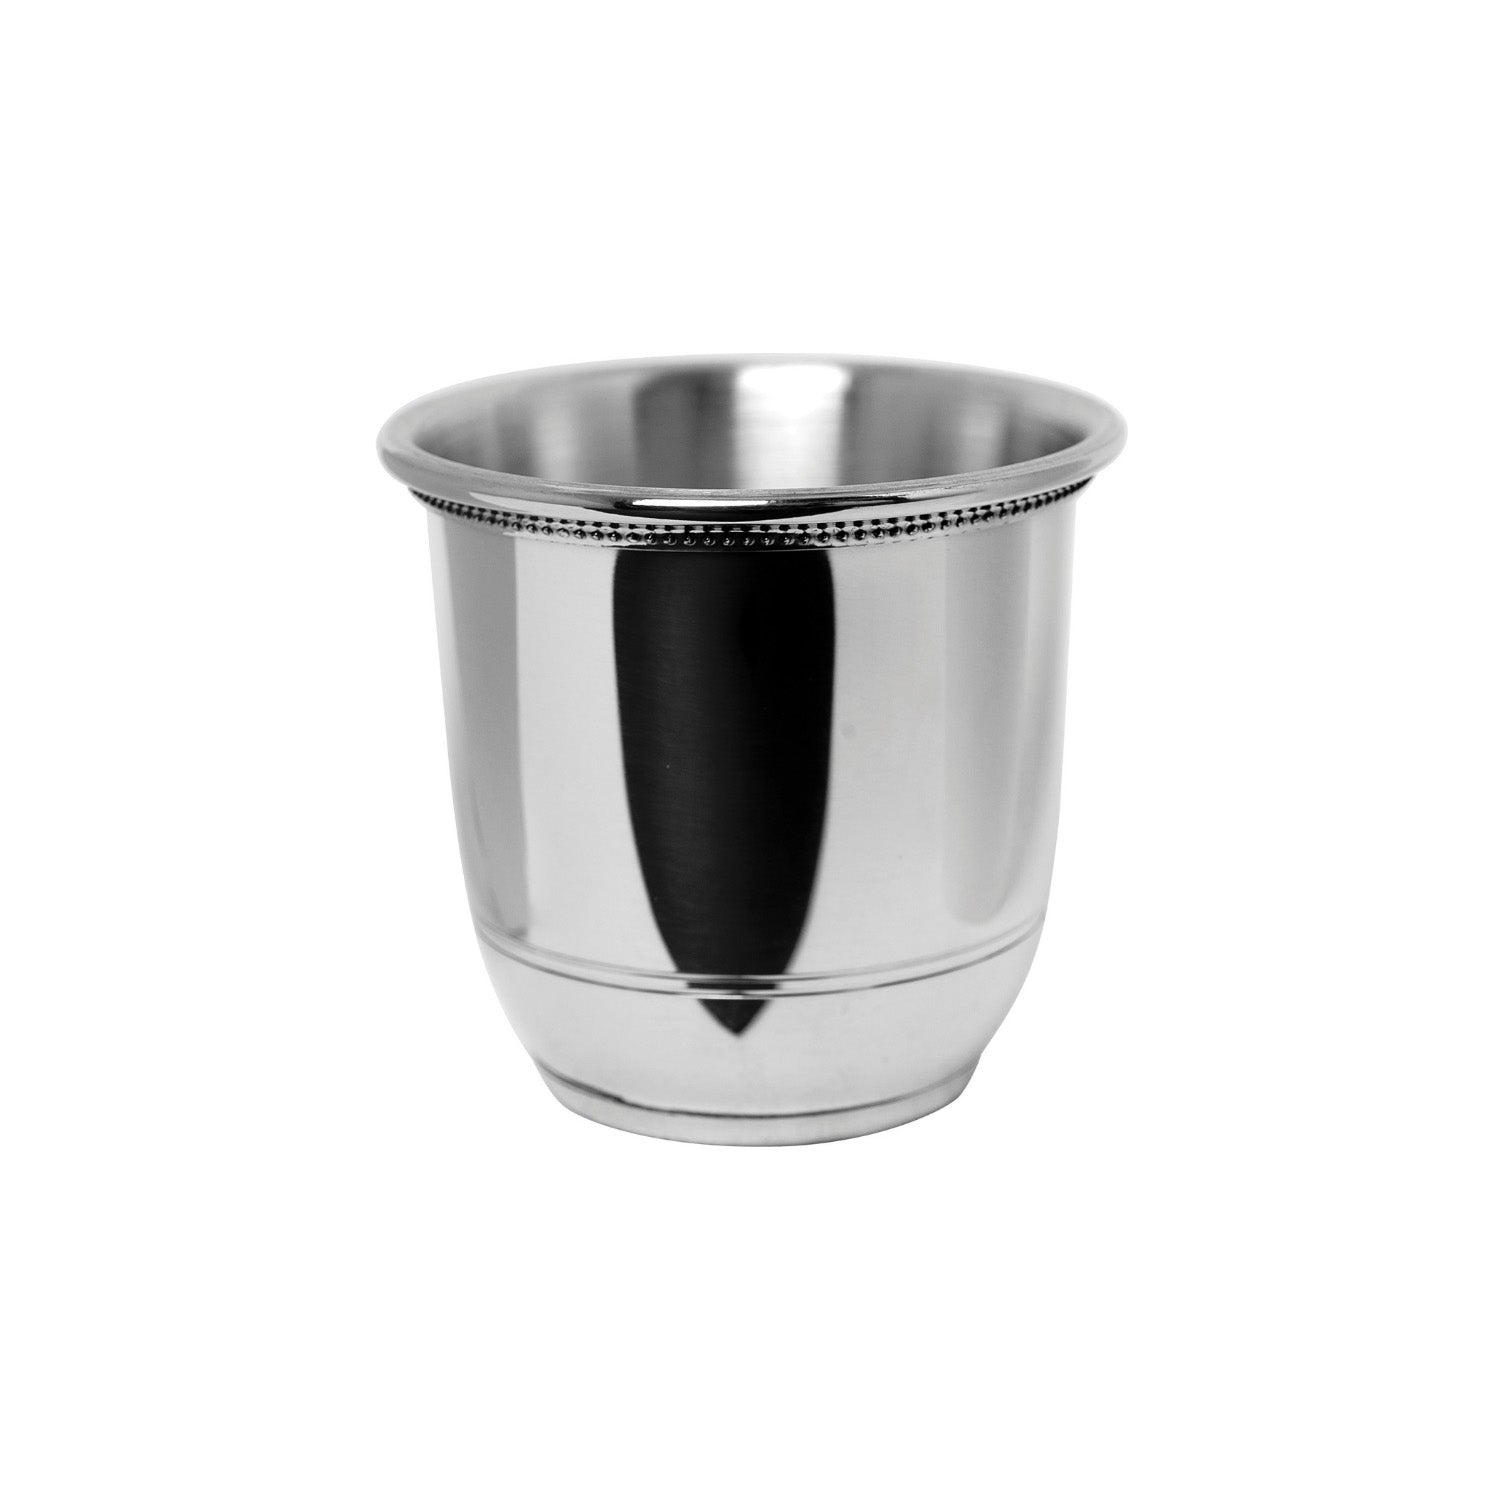 Images of America 8oz Mint Julep Cup 